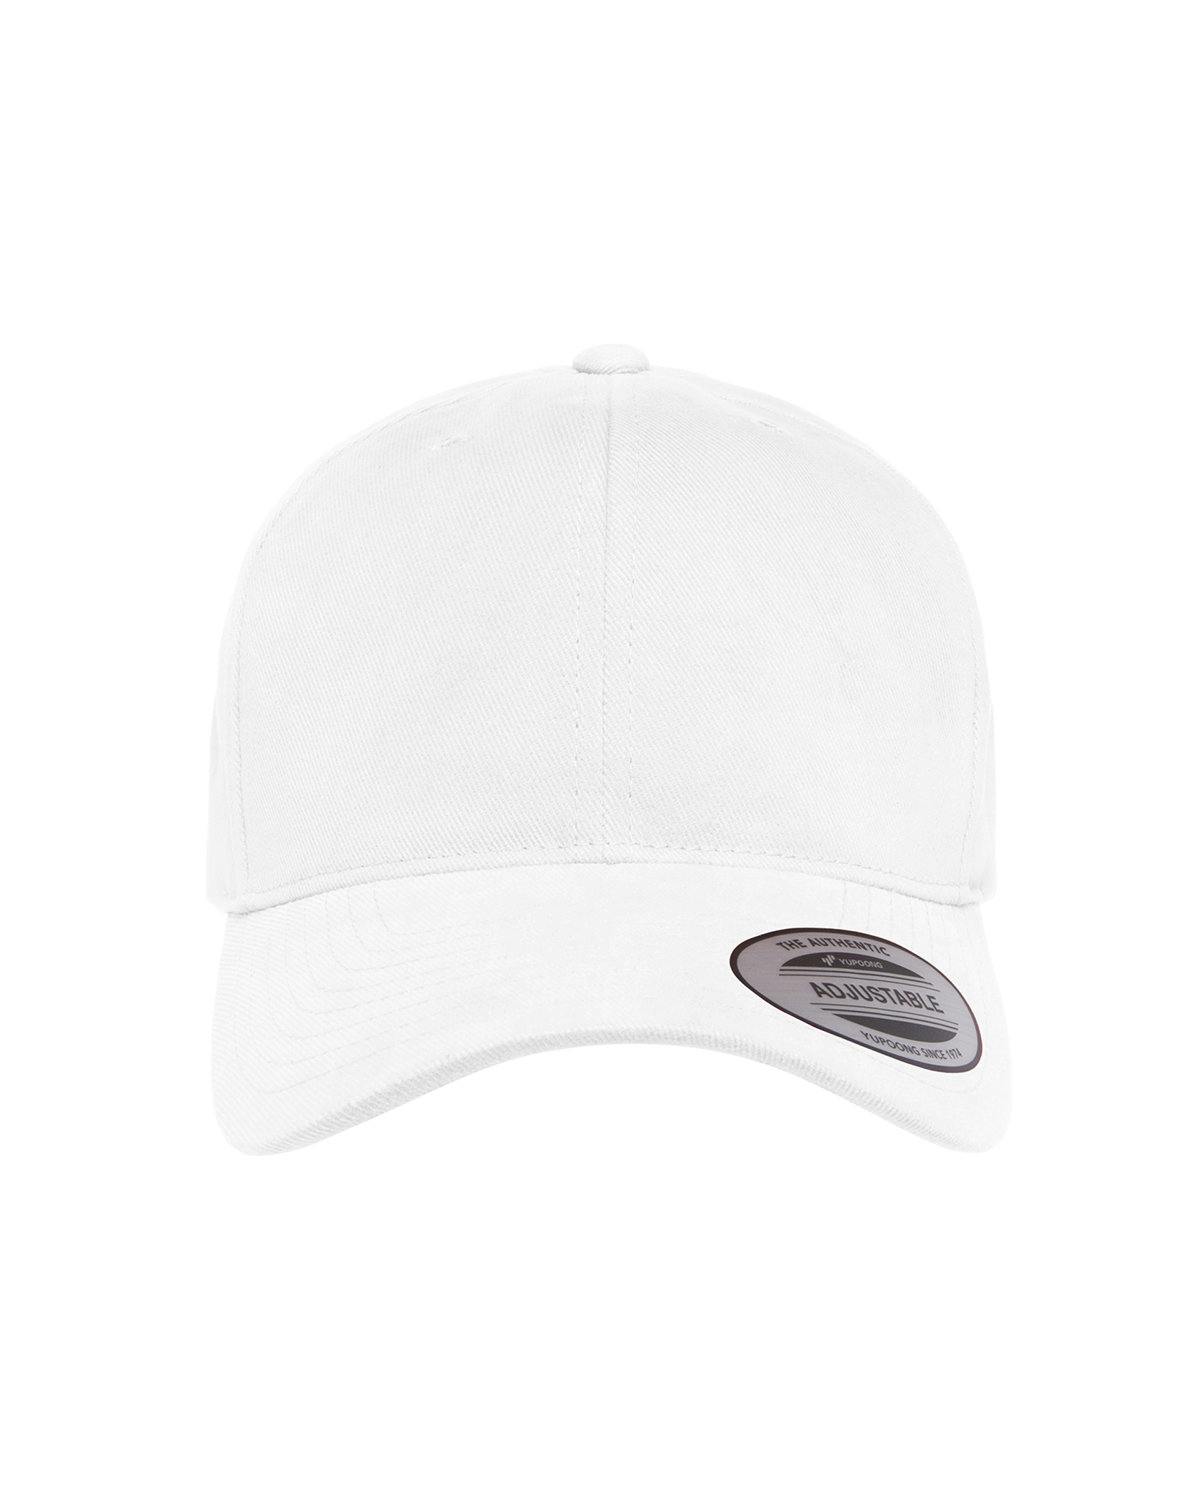 Image for Adult Brushed Cotton Twill Mid-Profile Cap